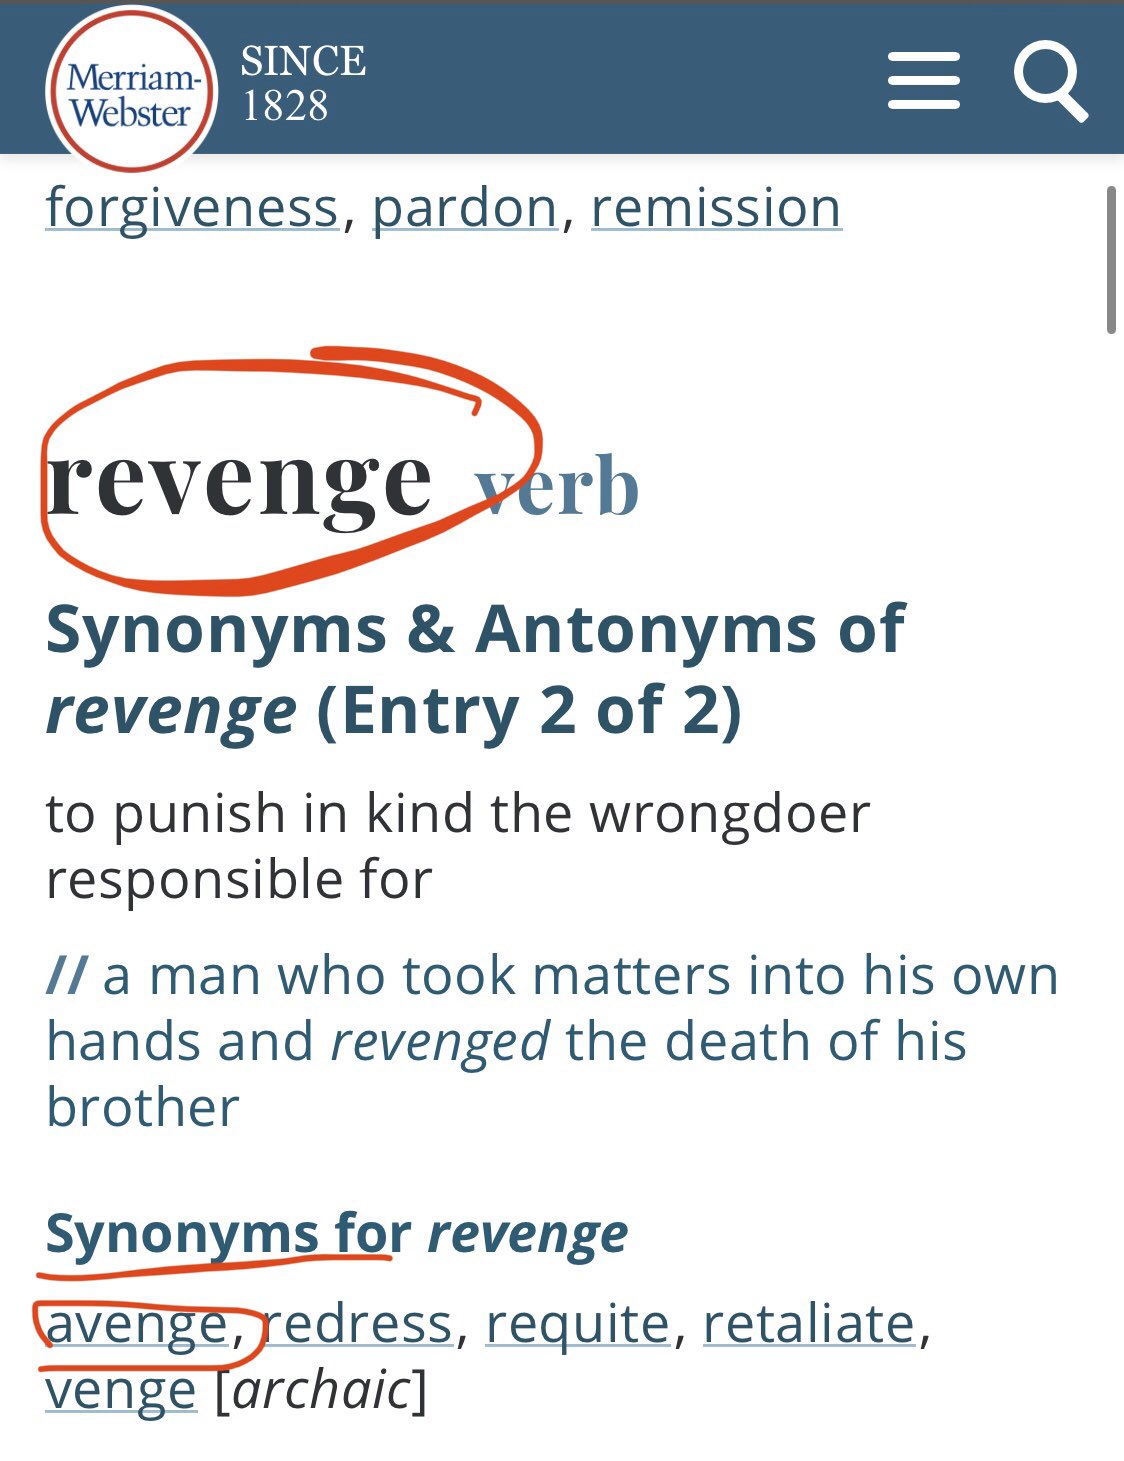 Vengeance - Definition, Meaning & Synonyms